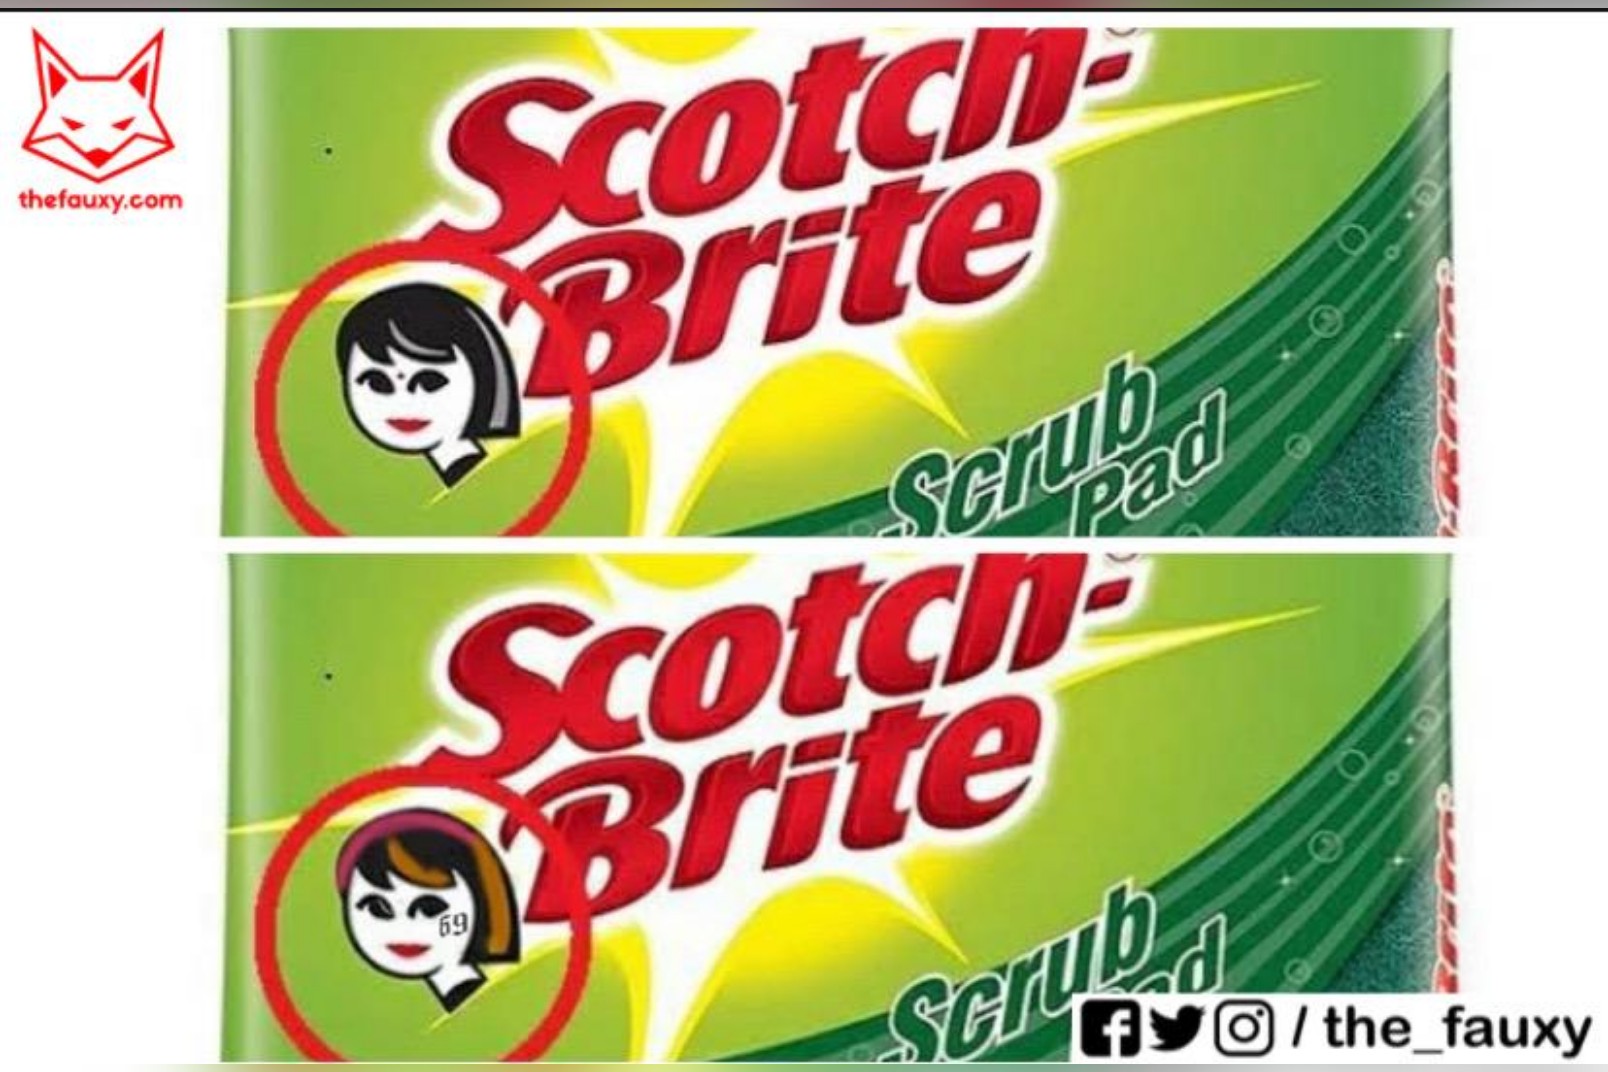 Scotch Brite Replaces Regressive Bindi Woman With A Modern Inked Woman In Its Logo.